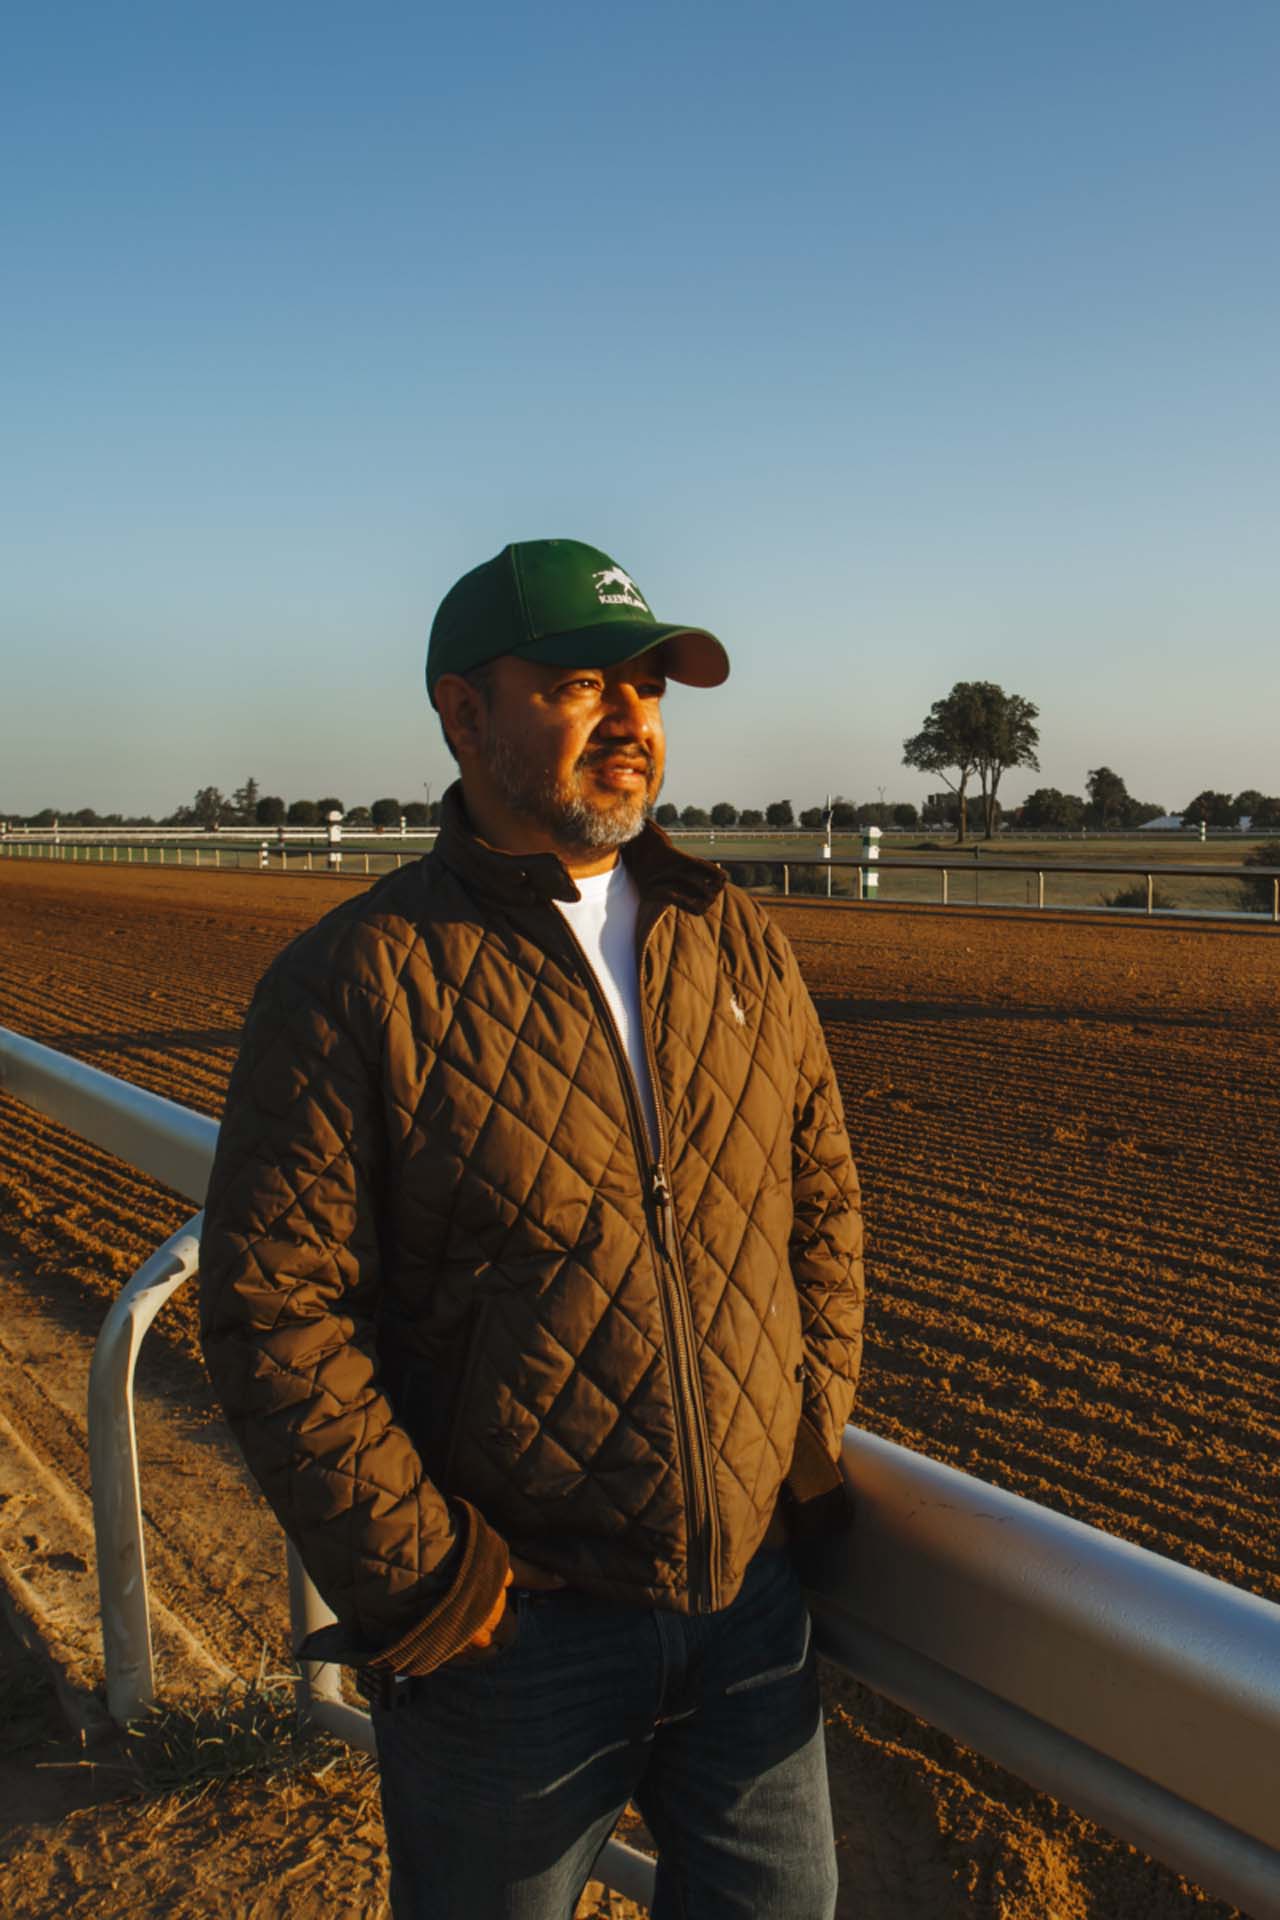 A photo of Alfredo Laureano looking off into the distance while standing by the dirt track at sunset. He is an older Hispanic man with graying chin stubble. He is wearing a green Keeneland-brand hat and a brown Keeneland-brand jacket overtop a white shirt.